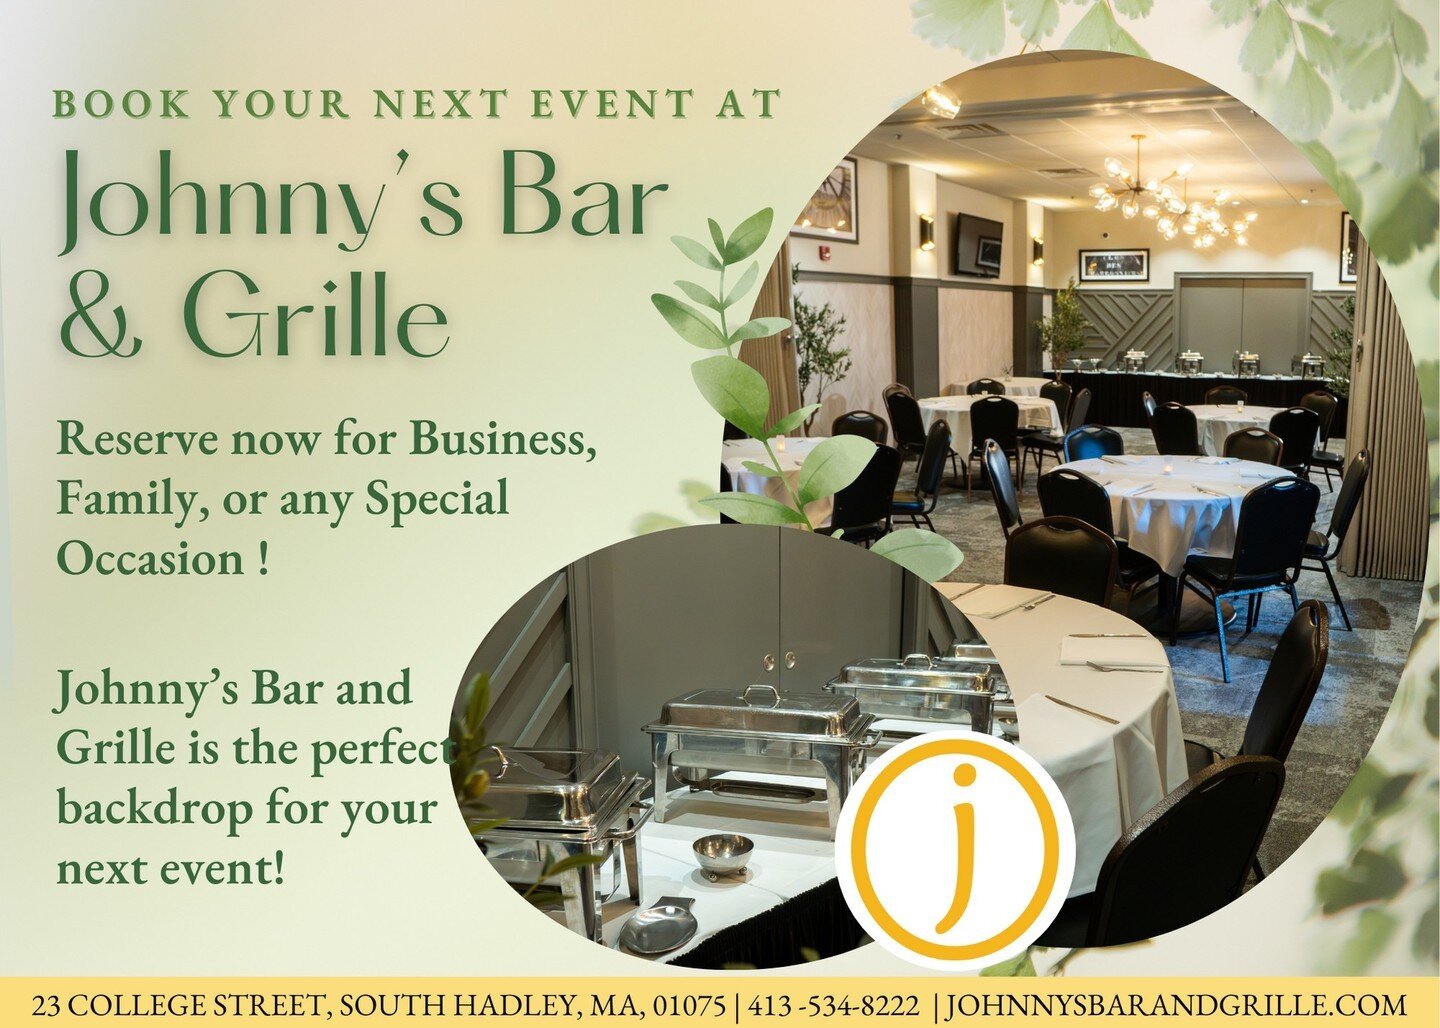 Celebrate with us at Johnny's Bar &amp; Grille 🌟✨ Let us turn your event into a celebration that sparkles! Contact us today😘 #JohnnysBarandGrille #BookNow